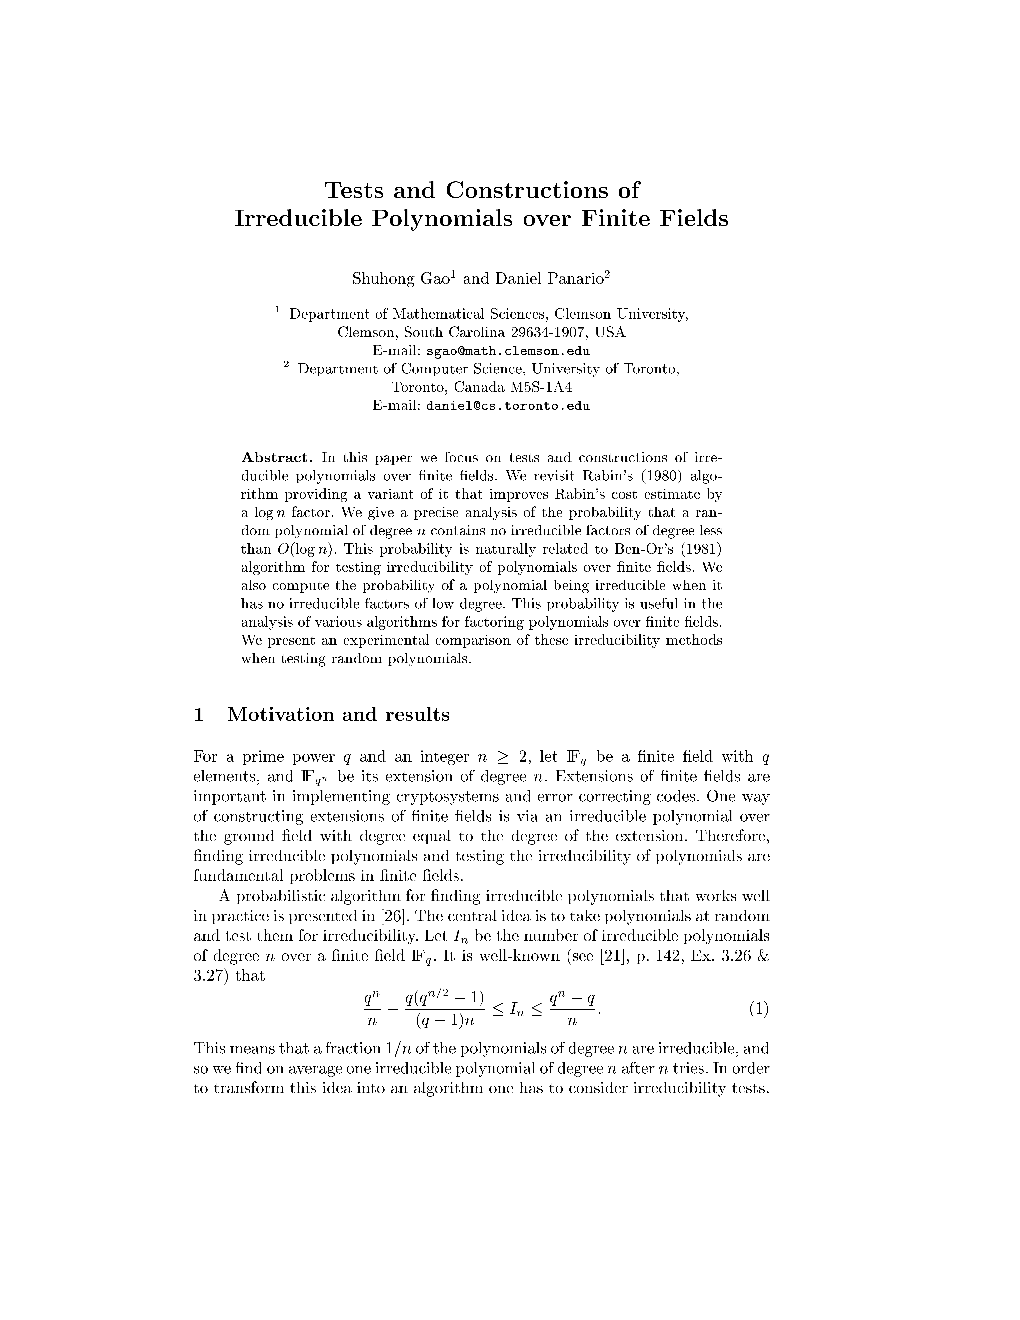 Tests and Constructions of Irreducible Polynomials Over Finite Fields